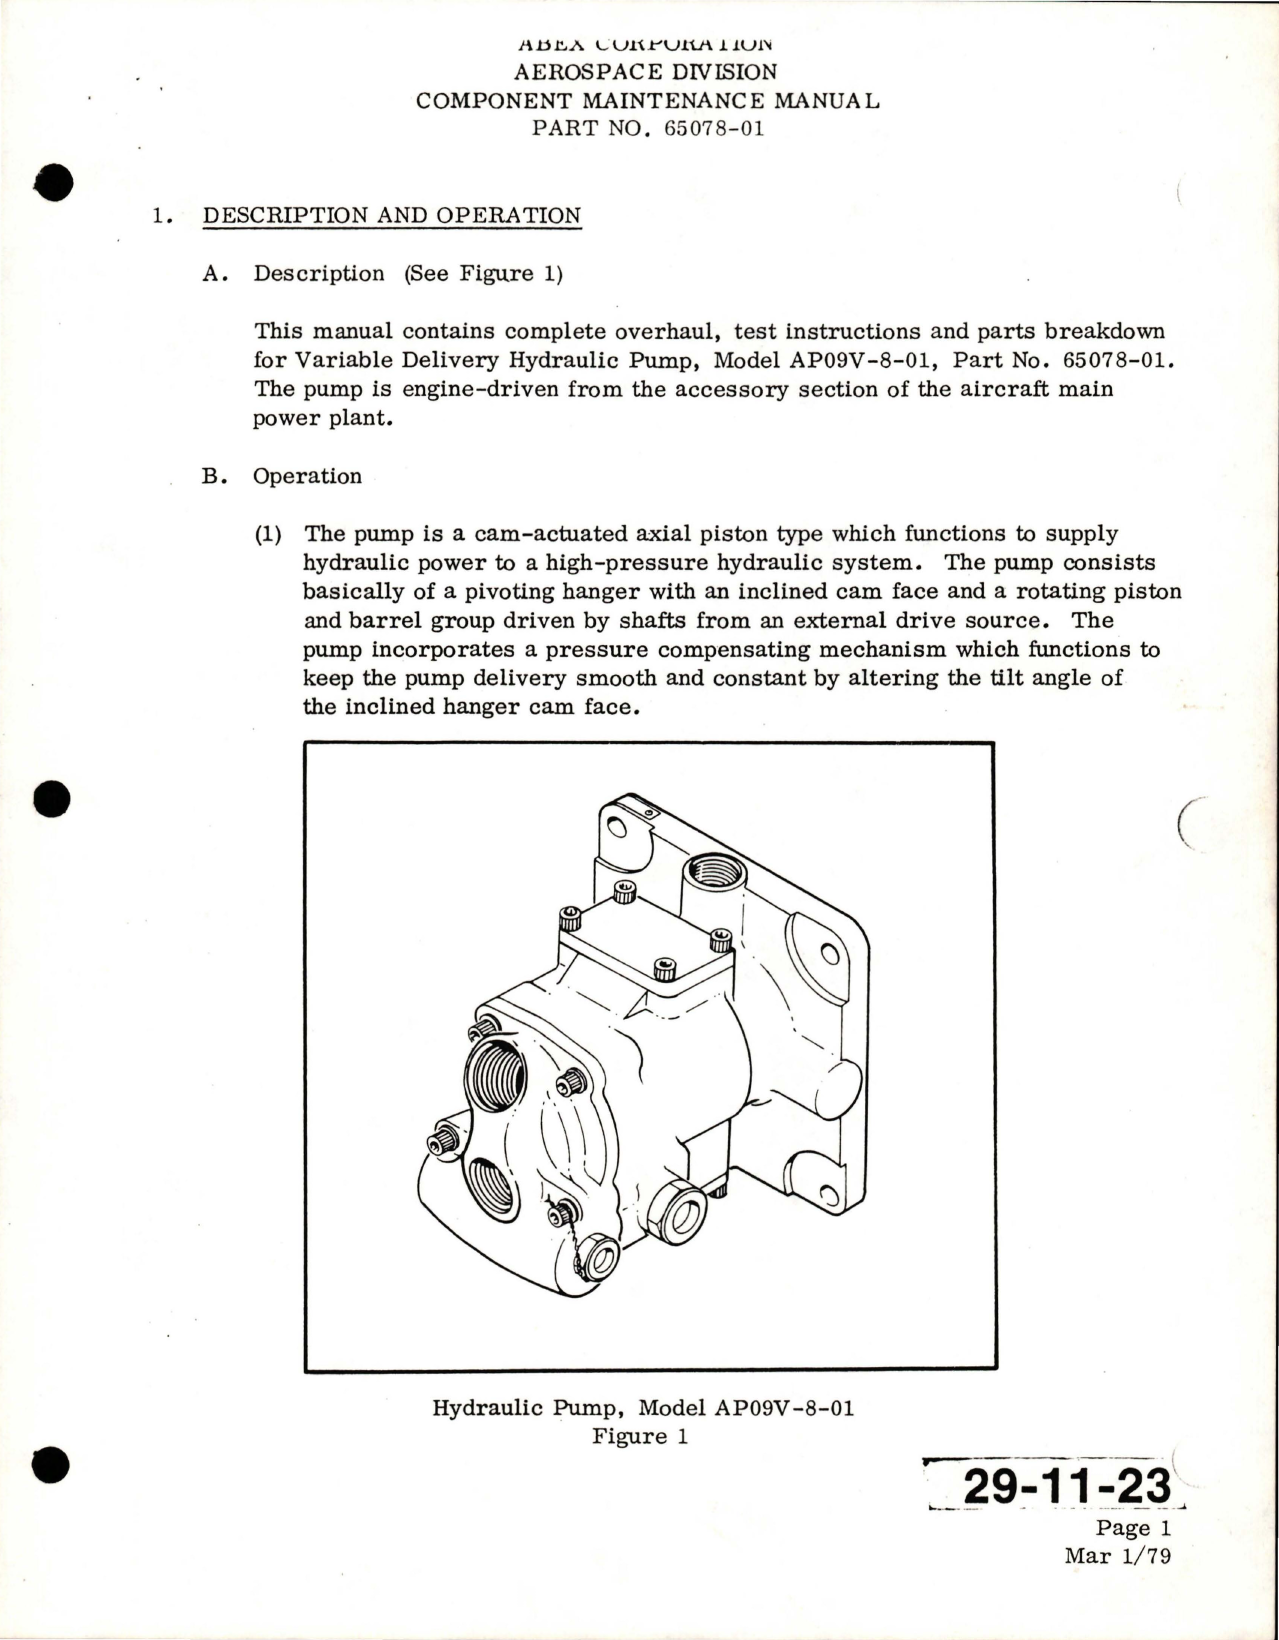 Sample page 7 from AirCorps Library document: Maintenance Manual with Illustrated Parts List for Variable Delivery Hydraulic Pump - Model AP09V-8-01 - Part 65078-01